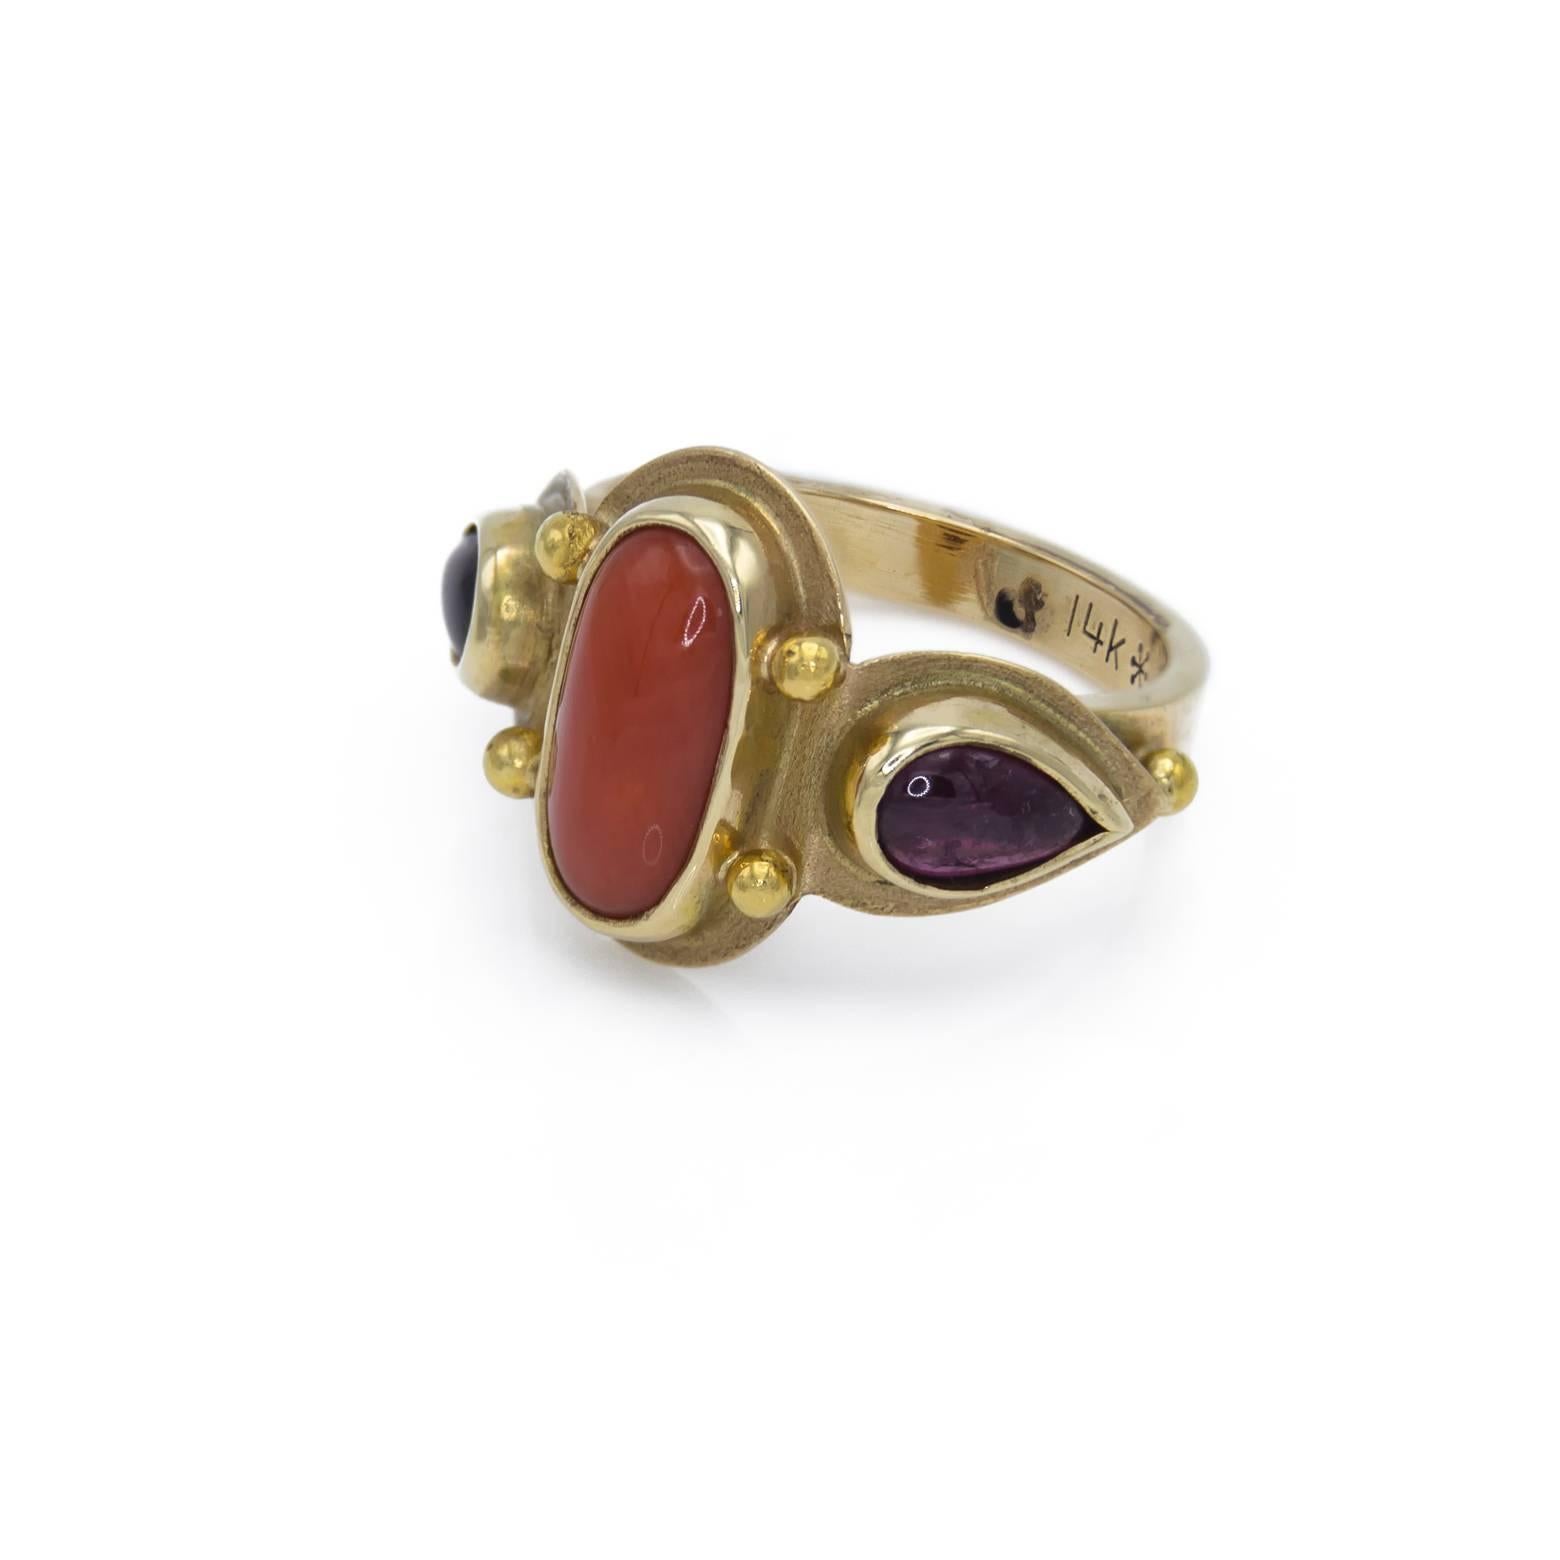 This beautiful 3 stone ring is adorned with two pear-shaped garnets and a lovely creamy orange coral in the middle. It's very romantic and regal and exudes and air of strength to it. A unique and wonderful gold ring size 5.75